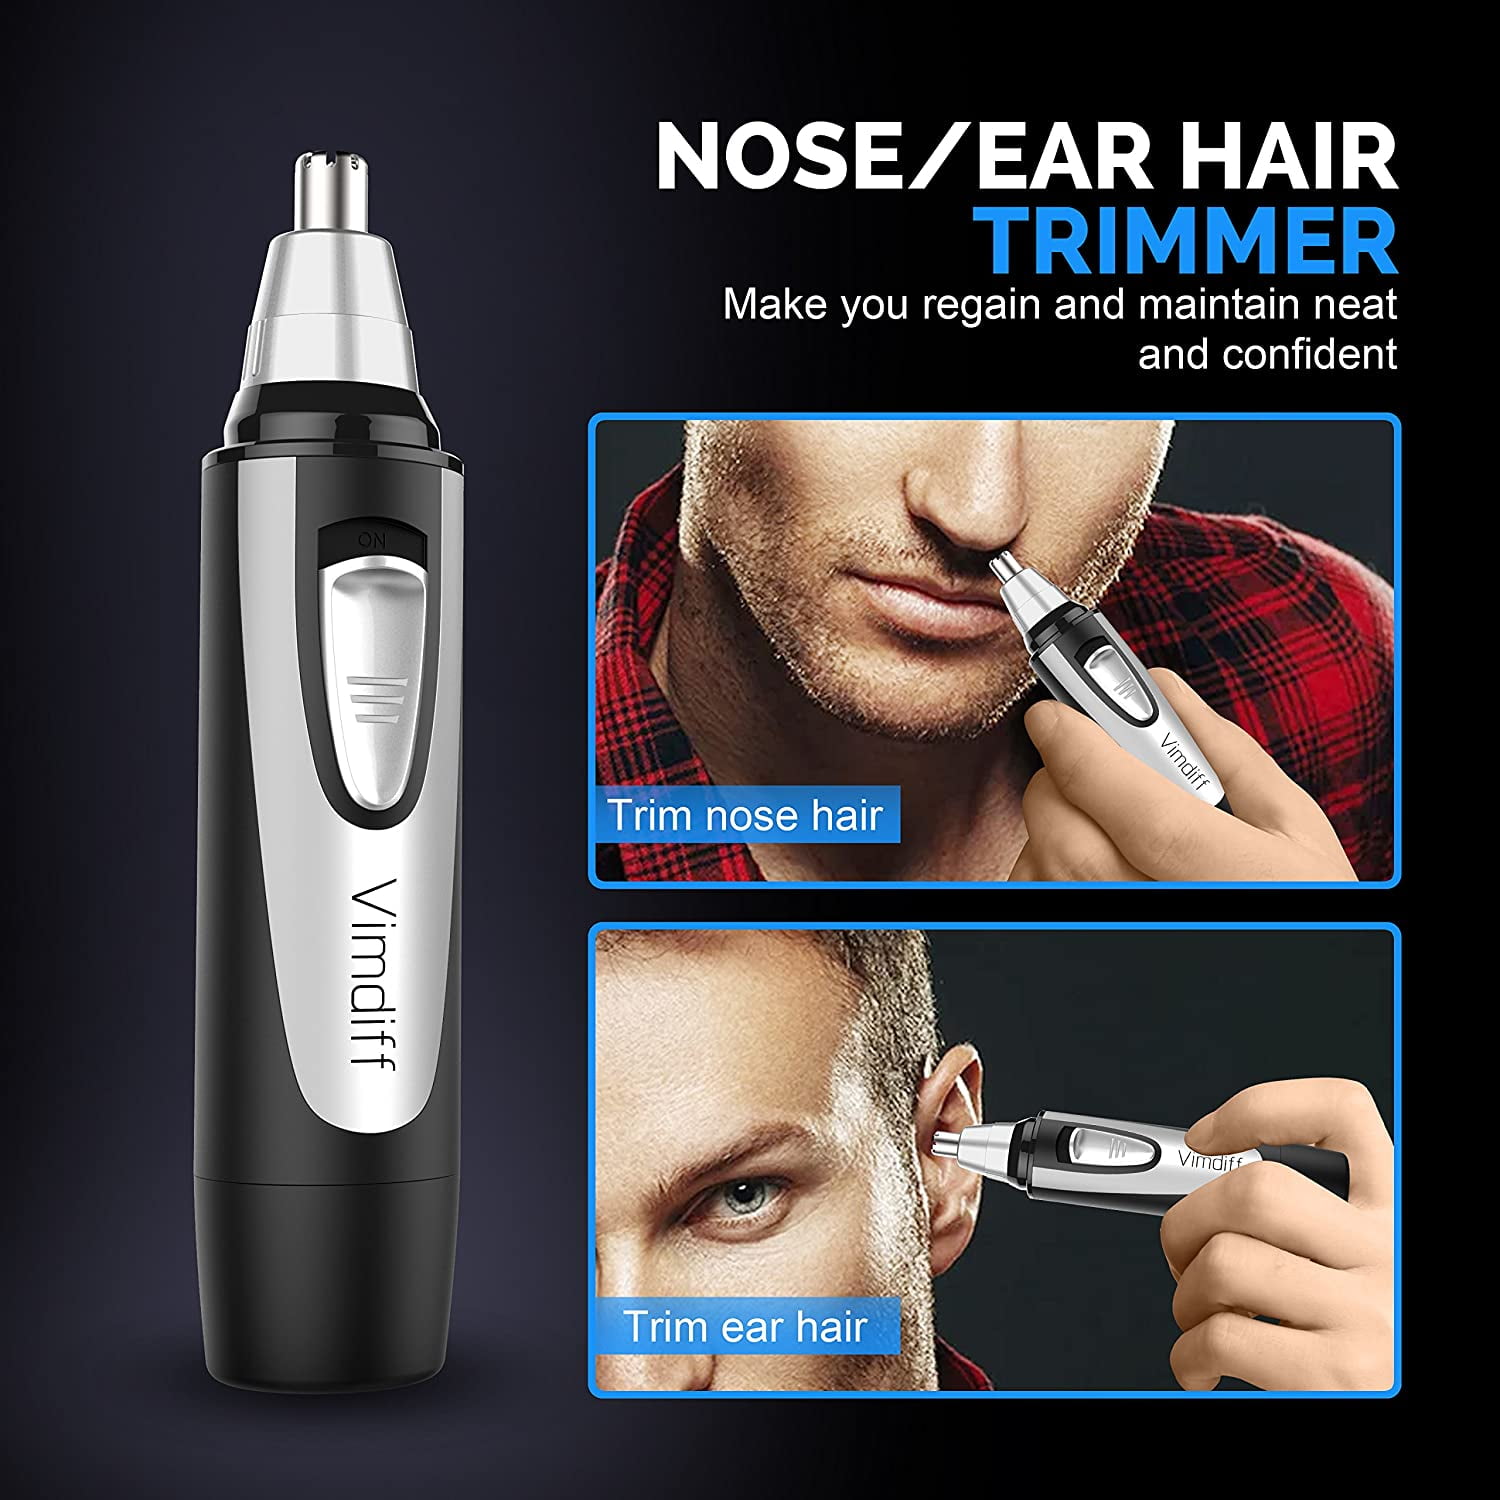 2021 Professional Nose Ear Hair Trimmer for Men Electric Nostril Nasal Hair Clippers Trimmers Remover with Vacuum Cleaning IPX7 Waterproof, Mute Motor, Wet/Dry, Battery-Operated - Walmart.com